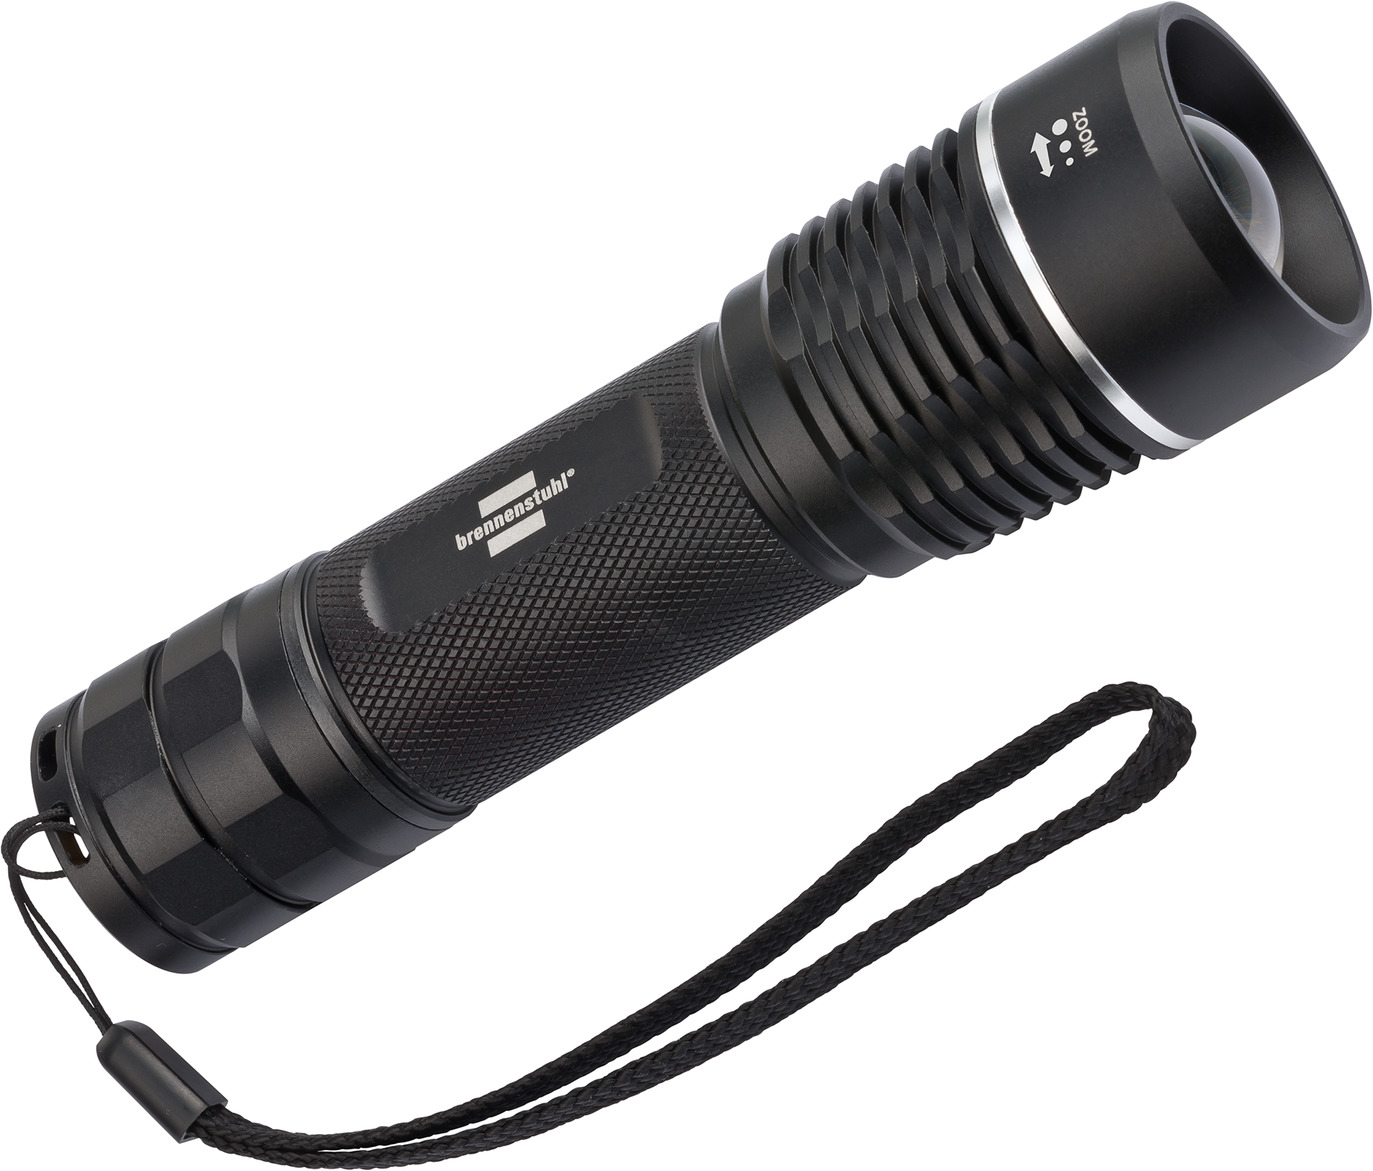 Torcia tascabile a LED con batteria ricaricabile LuxPremium TL 1200 AF,  IP67, CREE-LED, 20W 1250lm